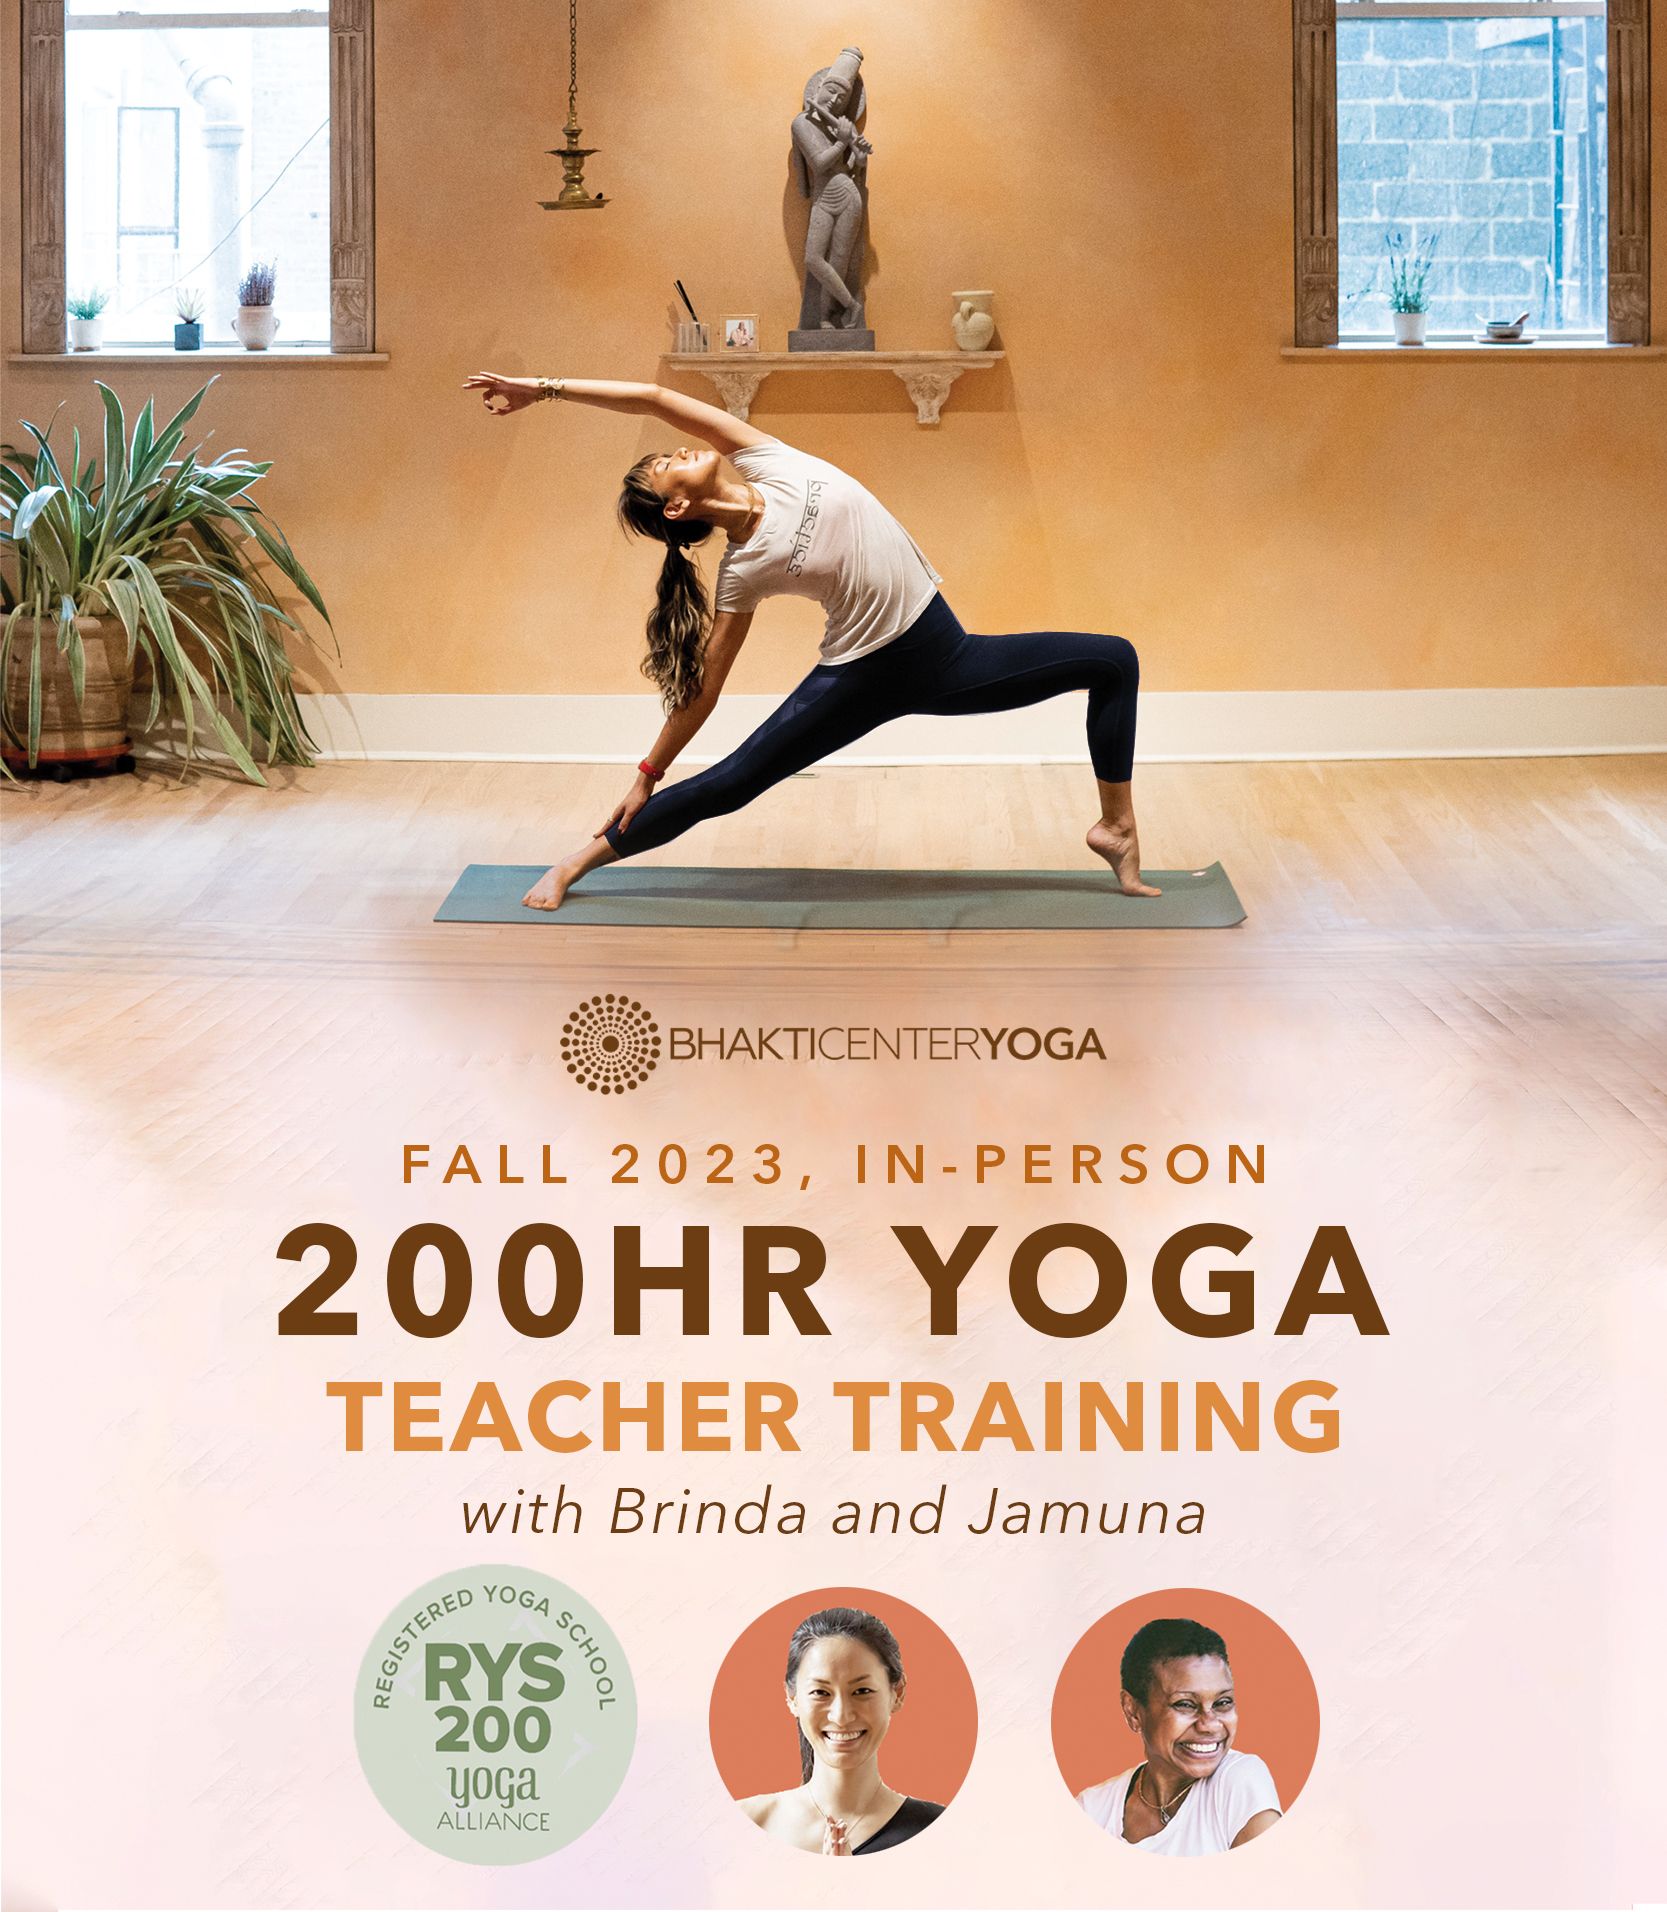 How Long Does It Take to Become a Certified Yoga Teacher? - Yoga